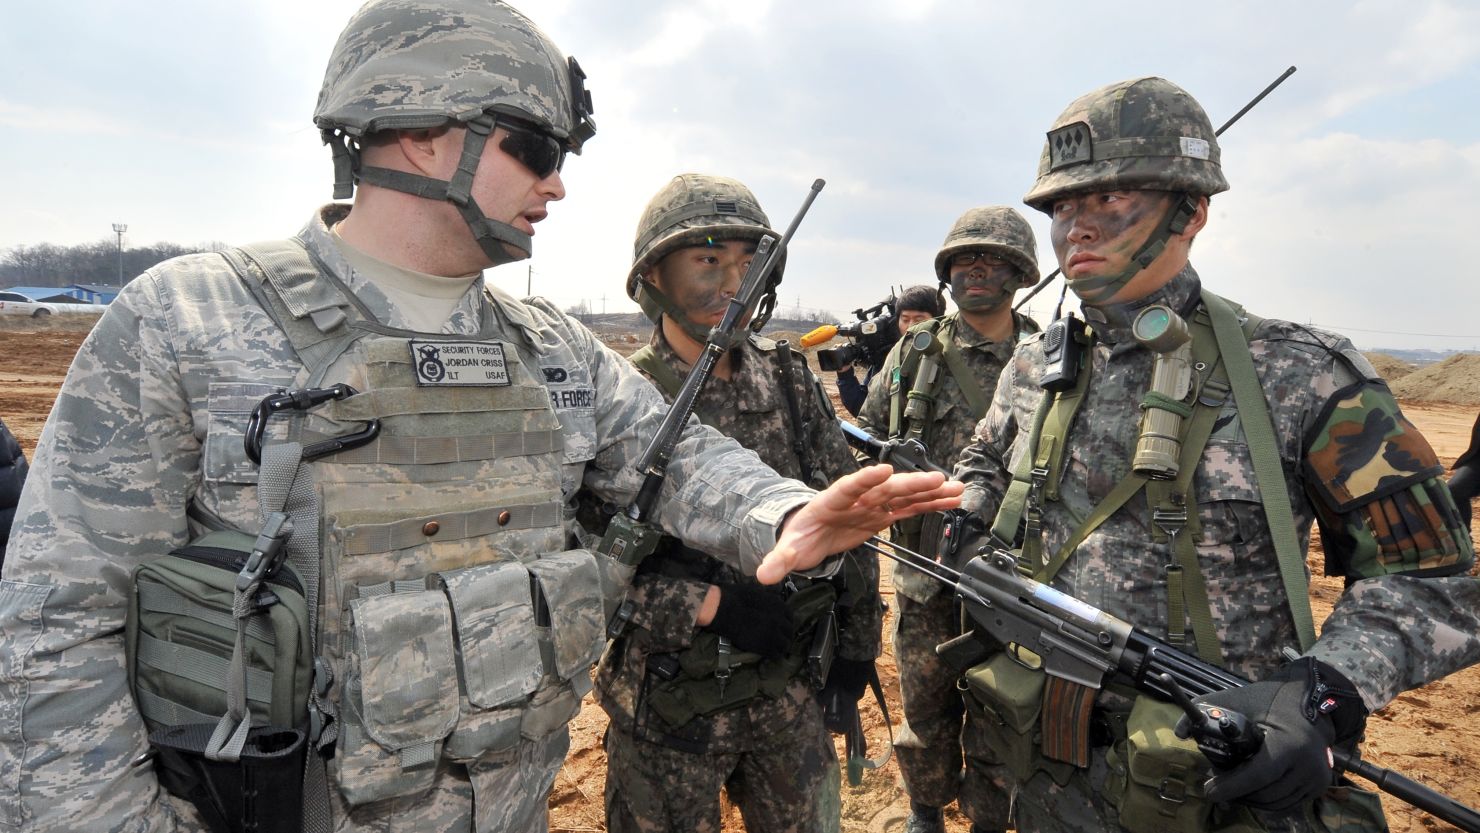 A US Air Force soldier (L) talks to South Korean soldiers during annual joint exercises south of Seoul, on March 14.